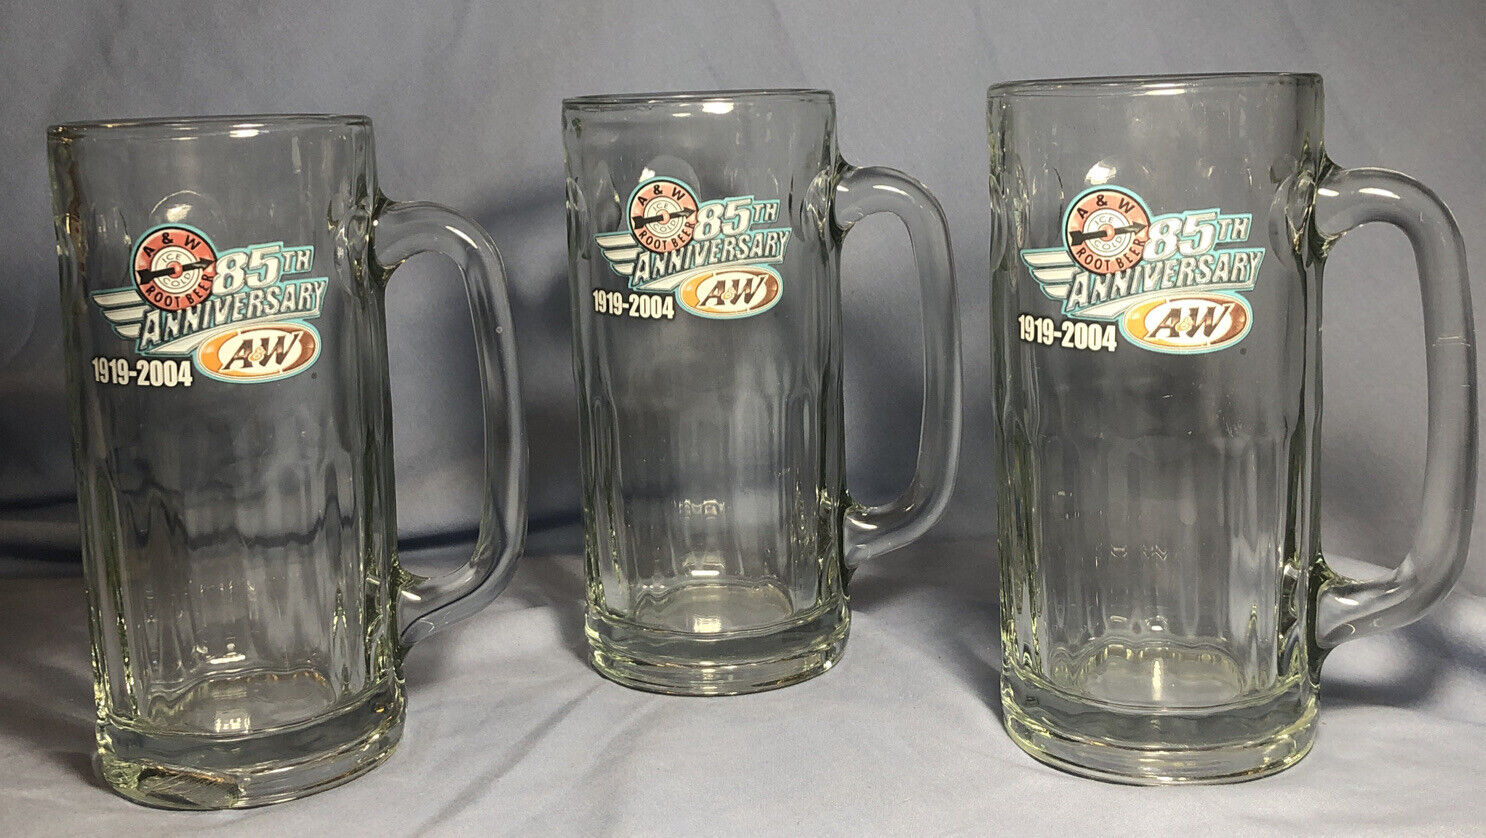 A&W Root Beer 85TH Anniversary 16oz 7” Mug 1919-2004 Dimpled Glass,(3)USED,H-4-2